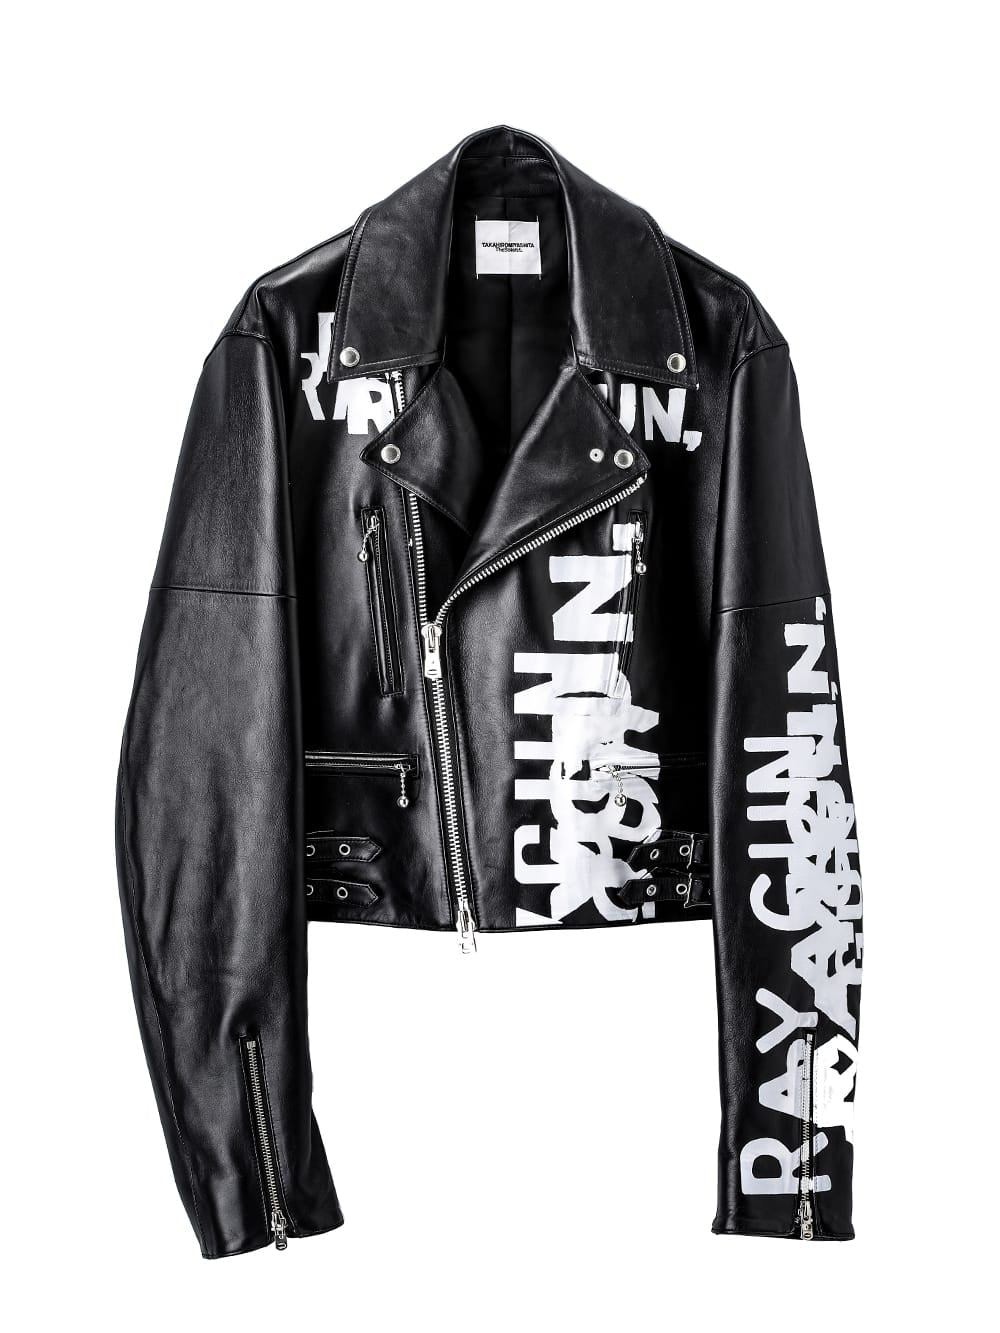 sj.0019aAW23-black two-way cropped riders jacket. THE TWO OF US 